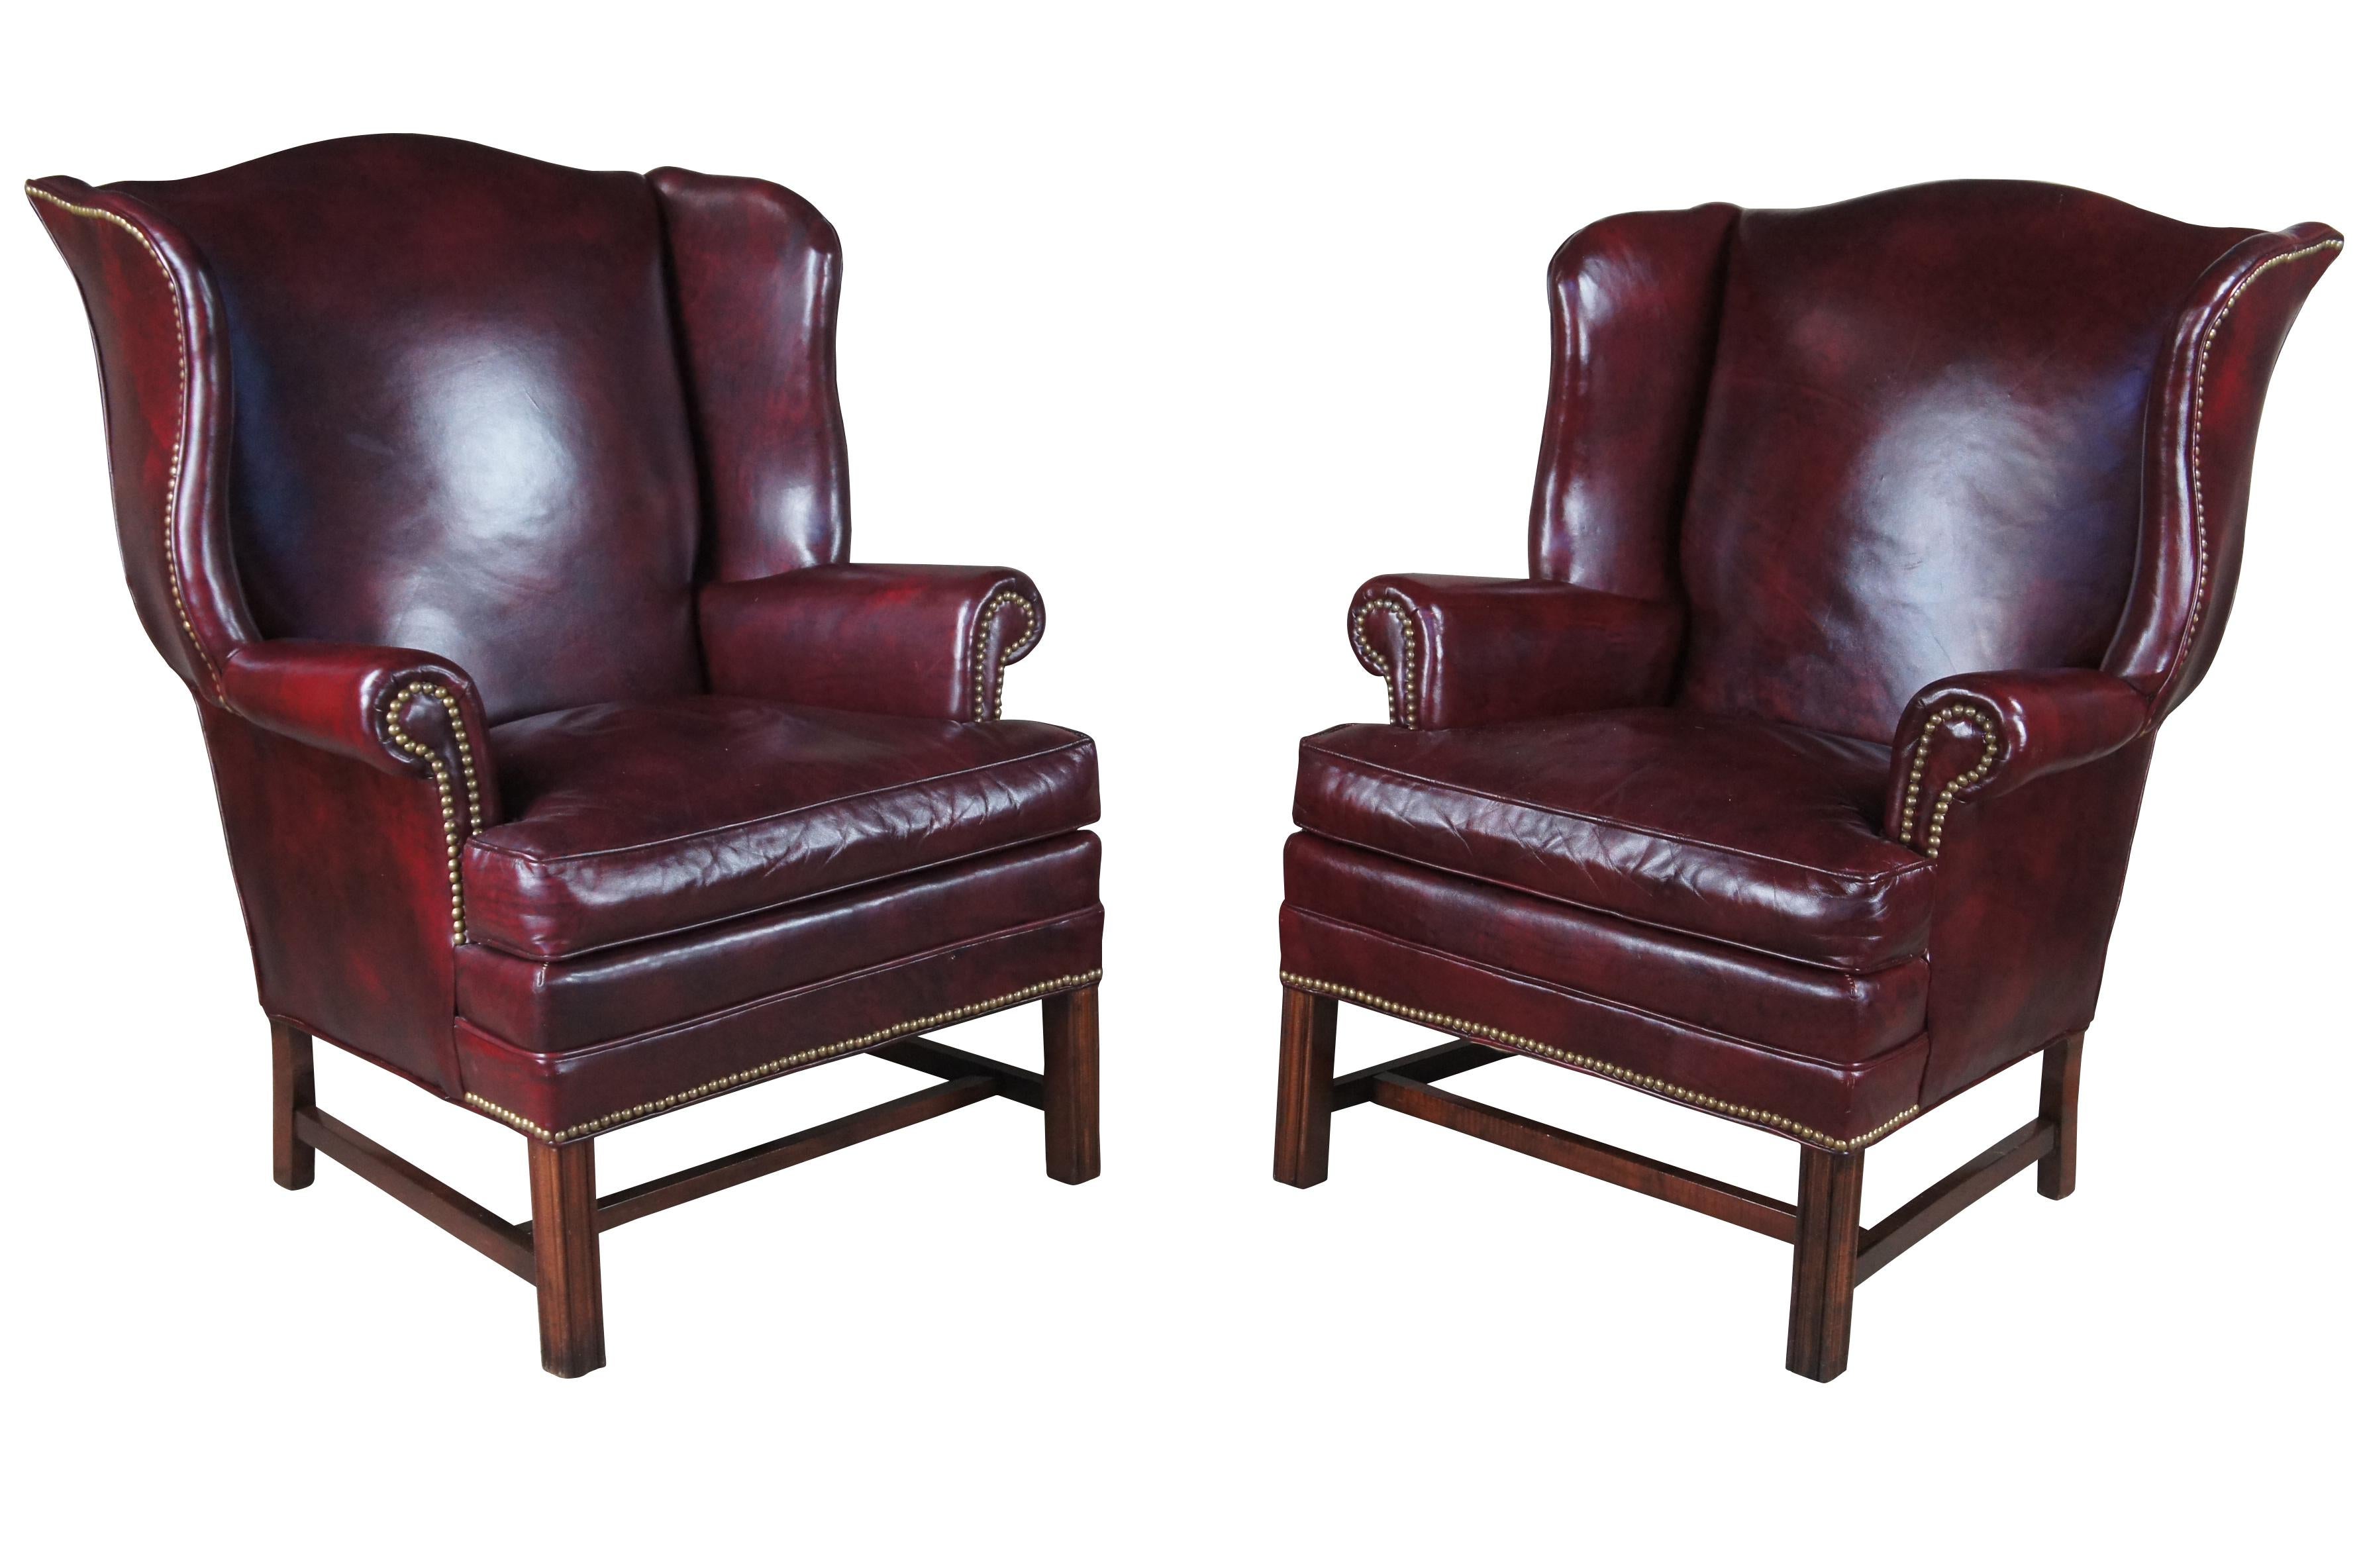 Vintage Bracewell Furniture Co leather wingback armchairs featuring serpentine Chippendale styling with dark red / burgundy leather, nailhead trim, rolled arms and mahogany legs.  Conover North Carolina.  Lackawanna Leather Co.

Dimensions:
32